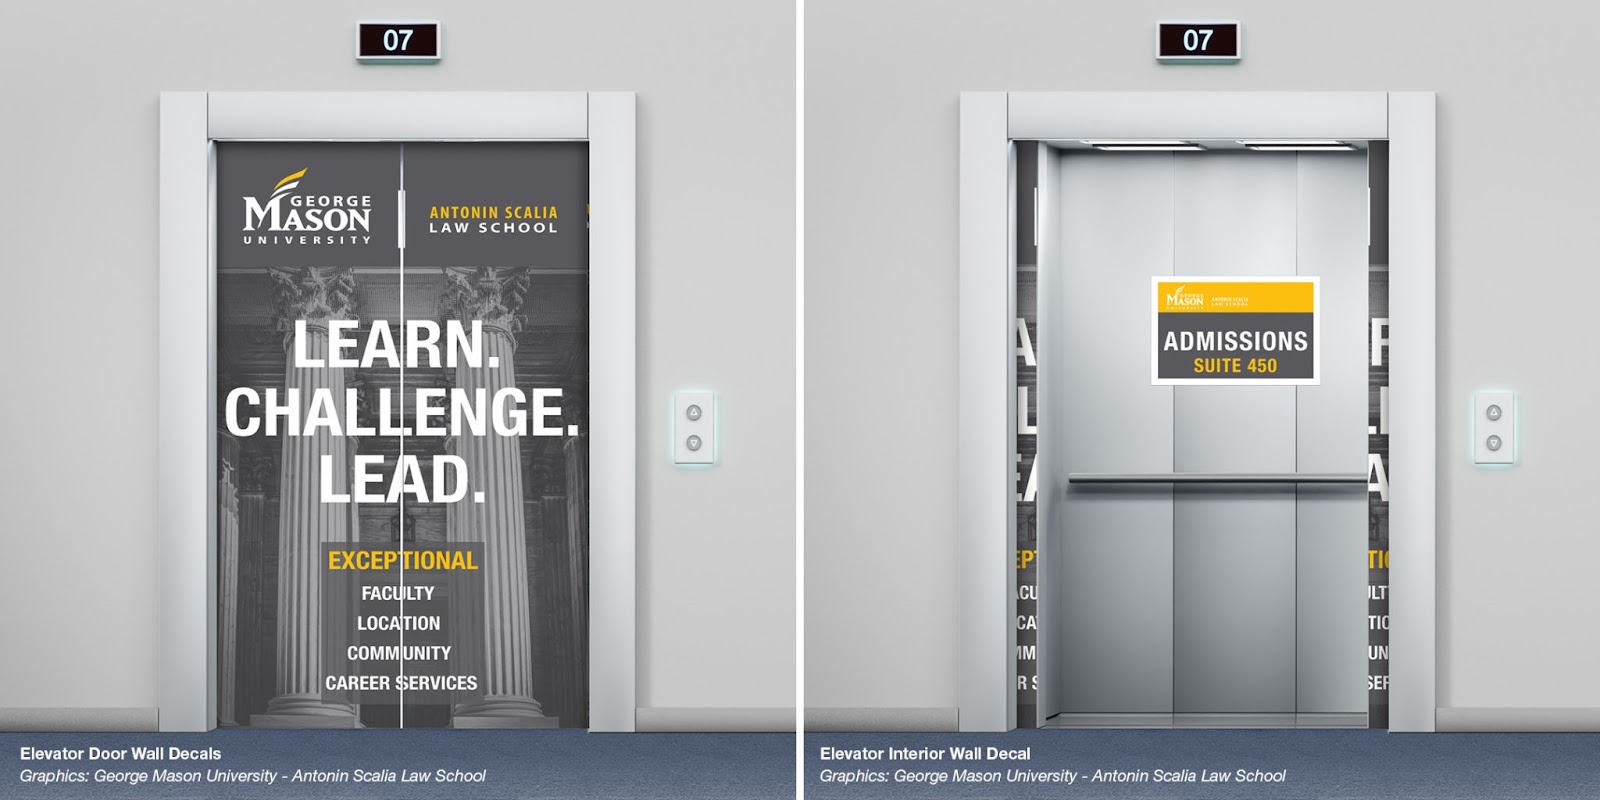 George Mason University branding applied as decals to elevator doors.  The second image shows the doors open to review an additional cling inside the elevator with directions to the Admissions Suite